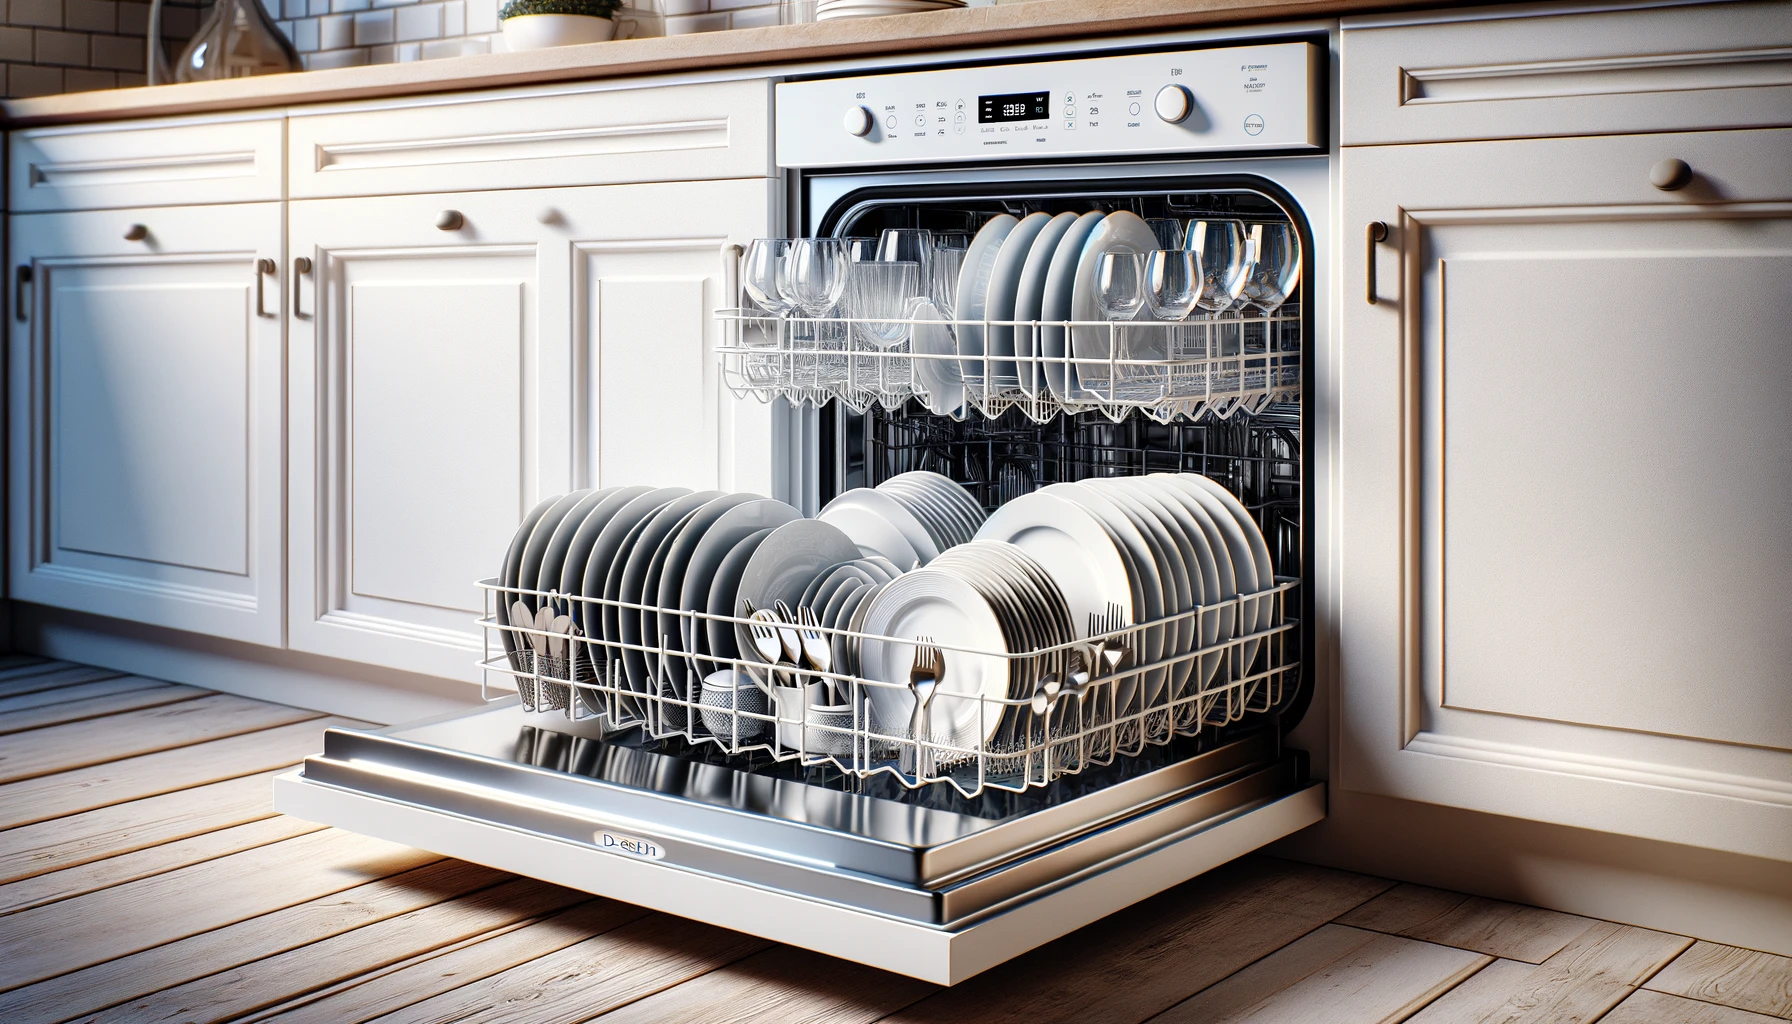 Photo of an open Kenmore dishwasher in white modern kitchen 